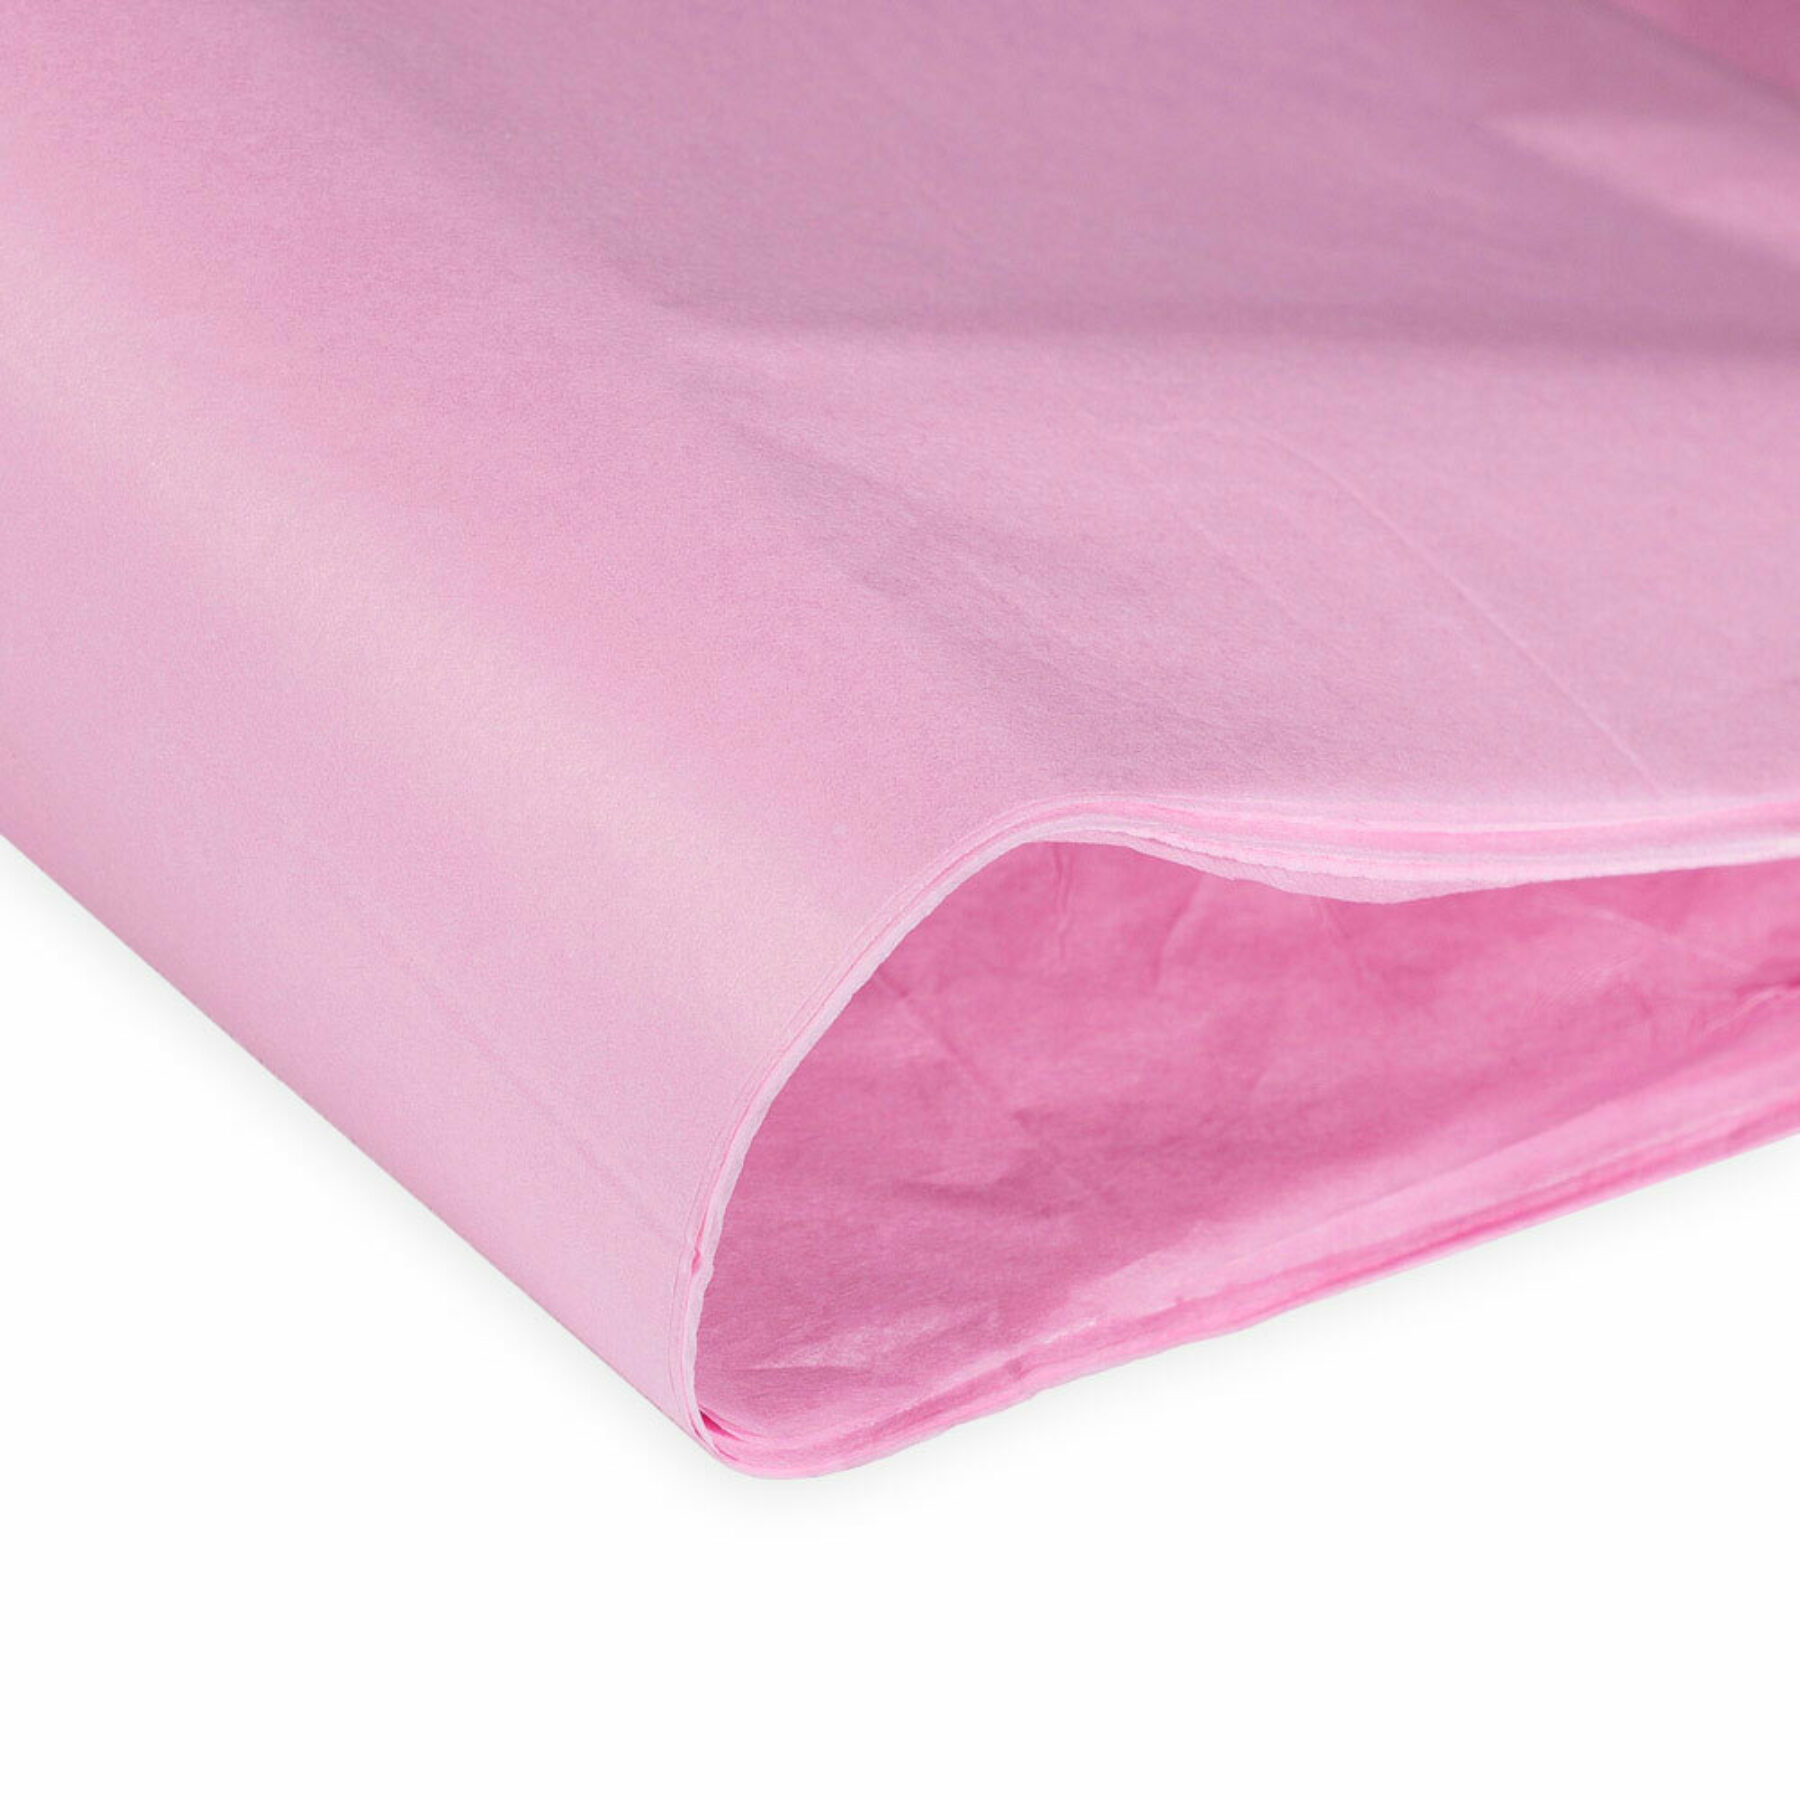 PA068 Pink Tissue Paper (480 sheets)